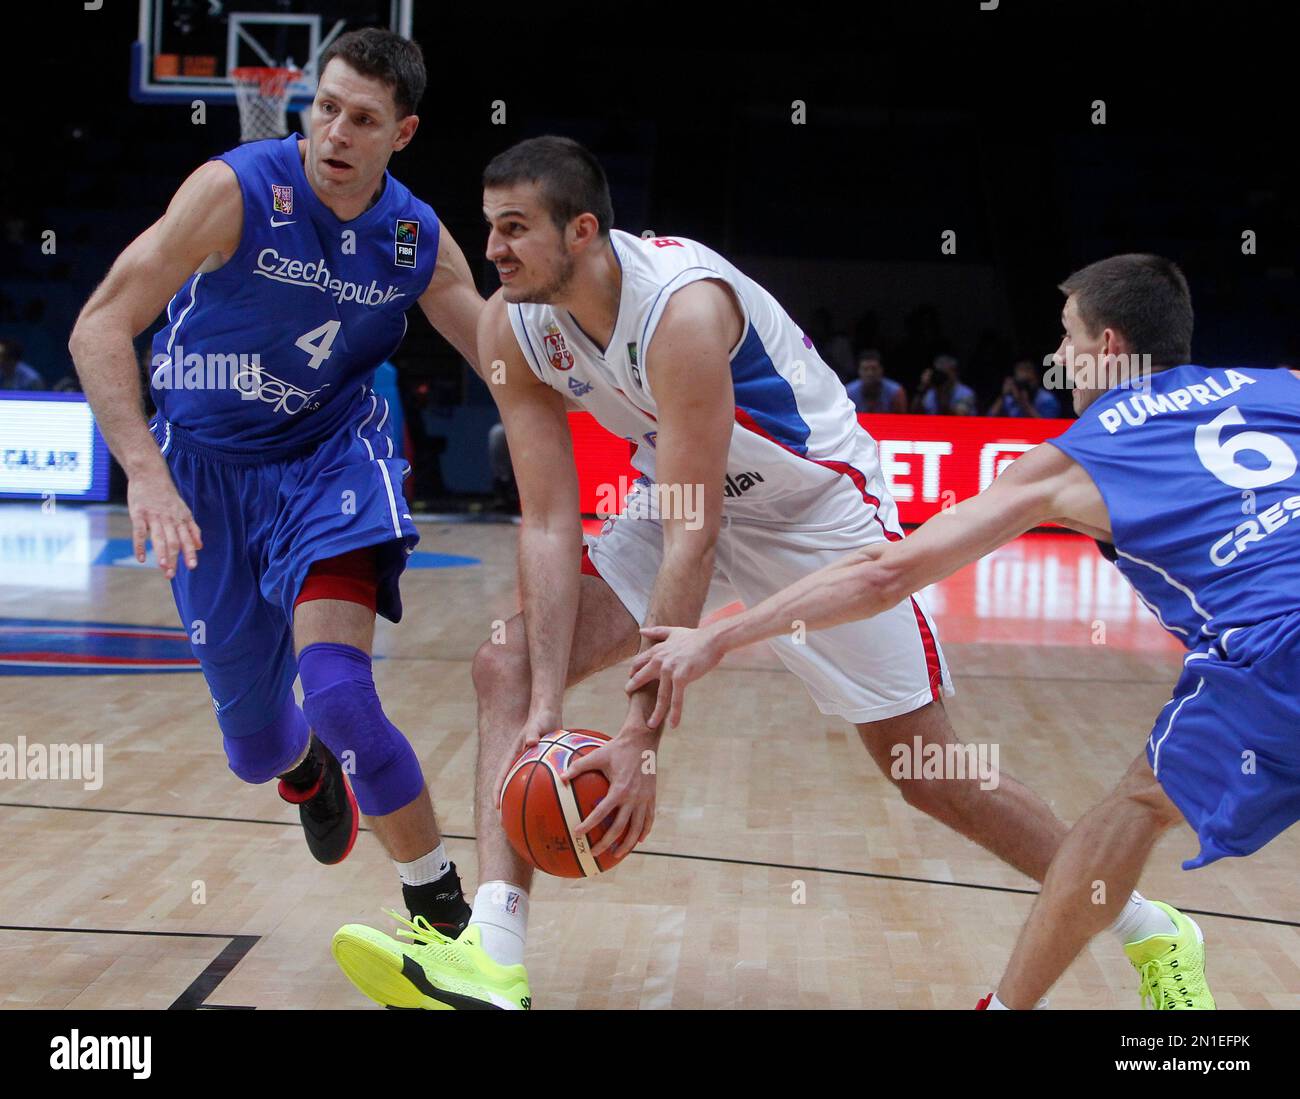 Pavel Pumprla of Czech Republic, left, and Andrew Albicy of France fight  for a ball during the qualification match for the Basketball World Cup 2019  Czech Republic vs France in Pardubice, Czech